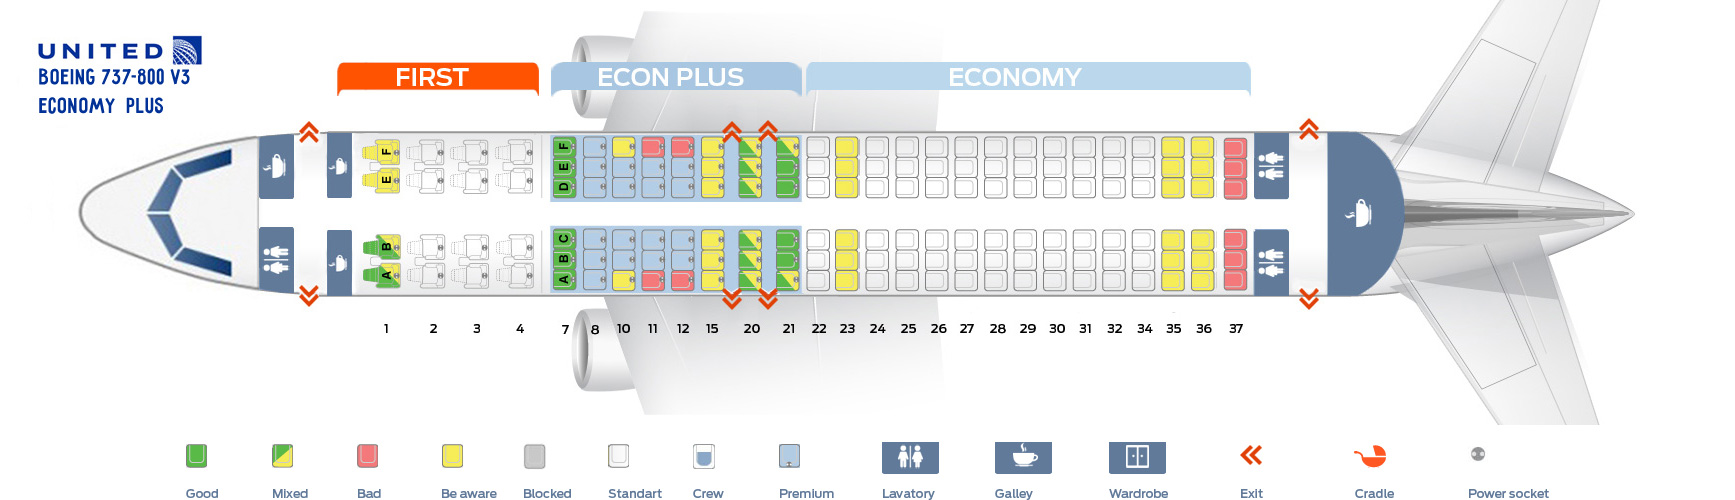 Seat_map_United_Airlines_Boeing_737_800_v3_Economy_Plus